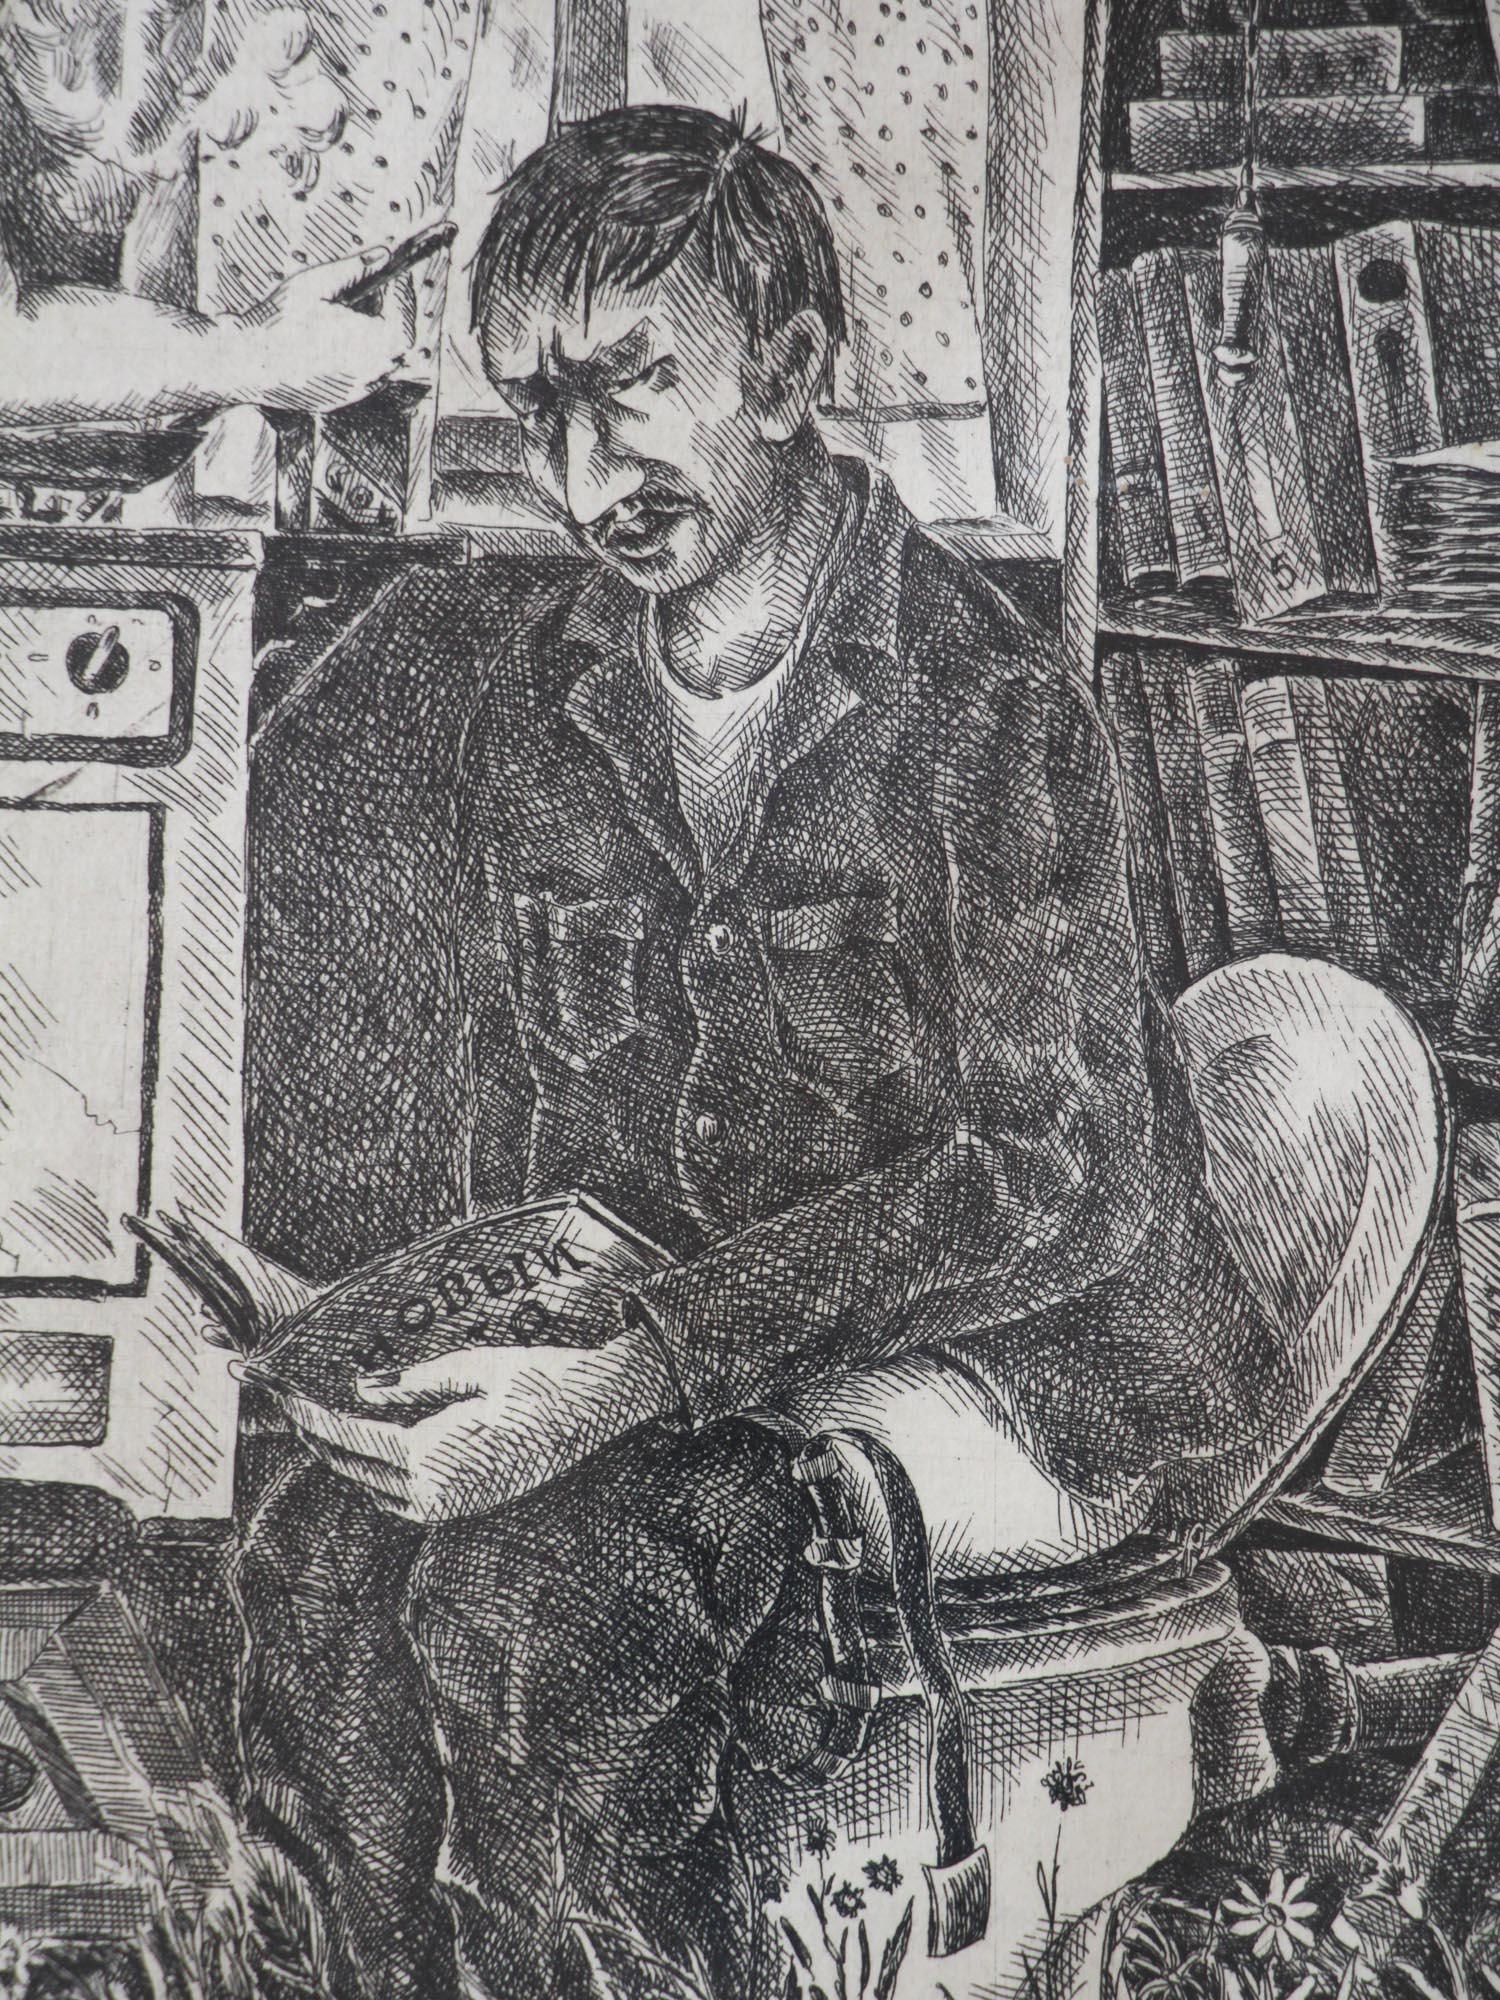 RUSSIAN ETCHING LIFE IS GOOD BY ALEXANDER KALUGIN PIC-2